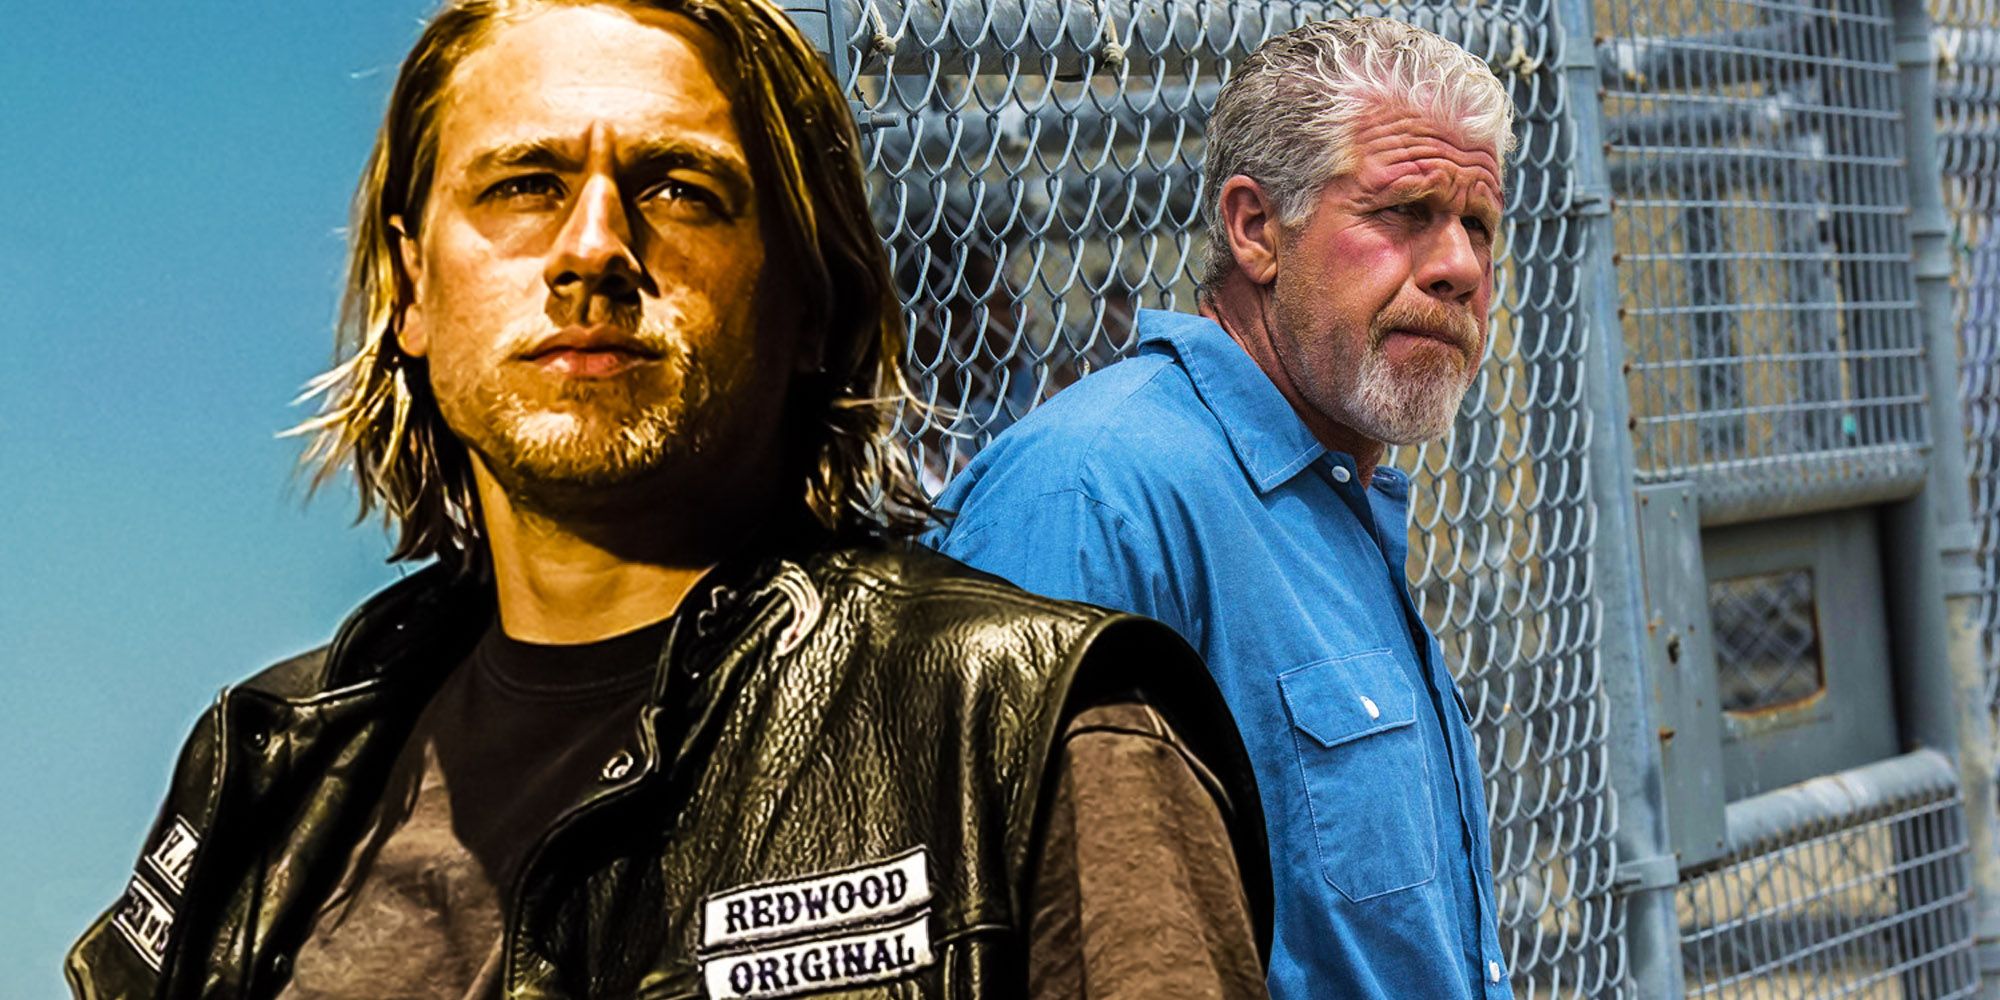 Sons of Anarchy: How Jax Repeated Clay's Worst SAMCRO Mistakes